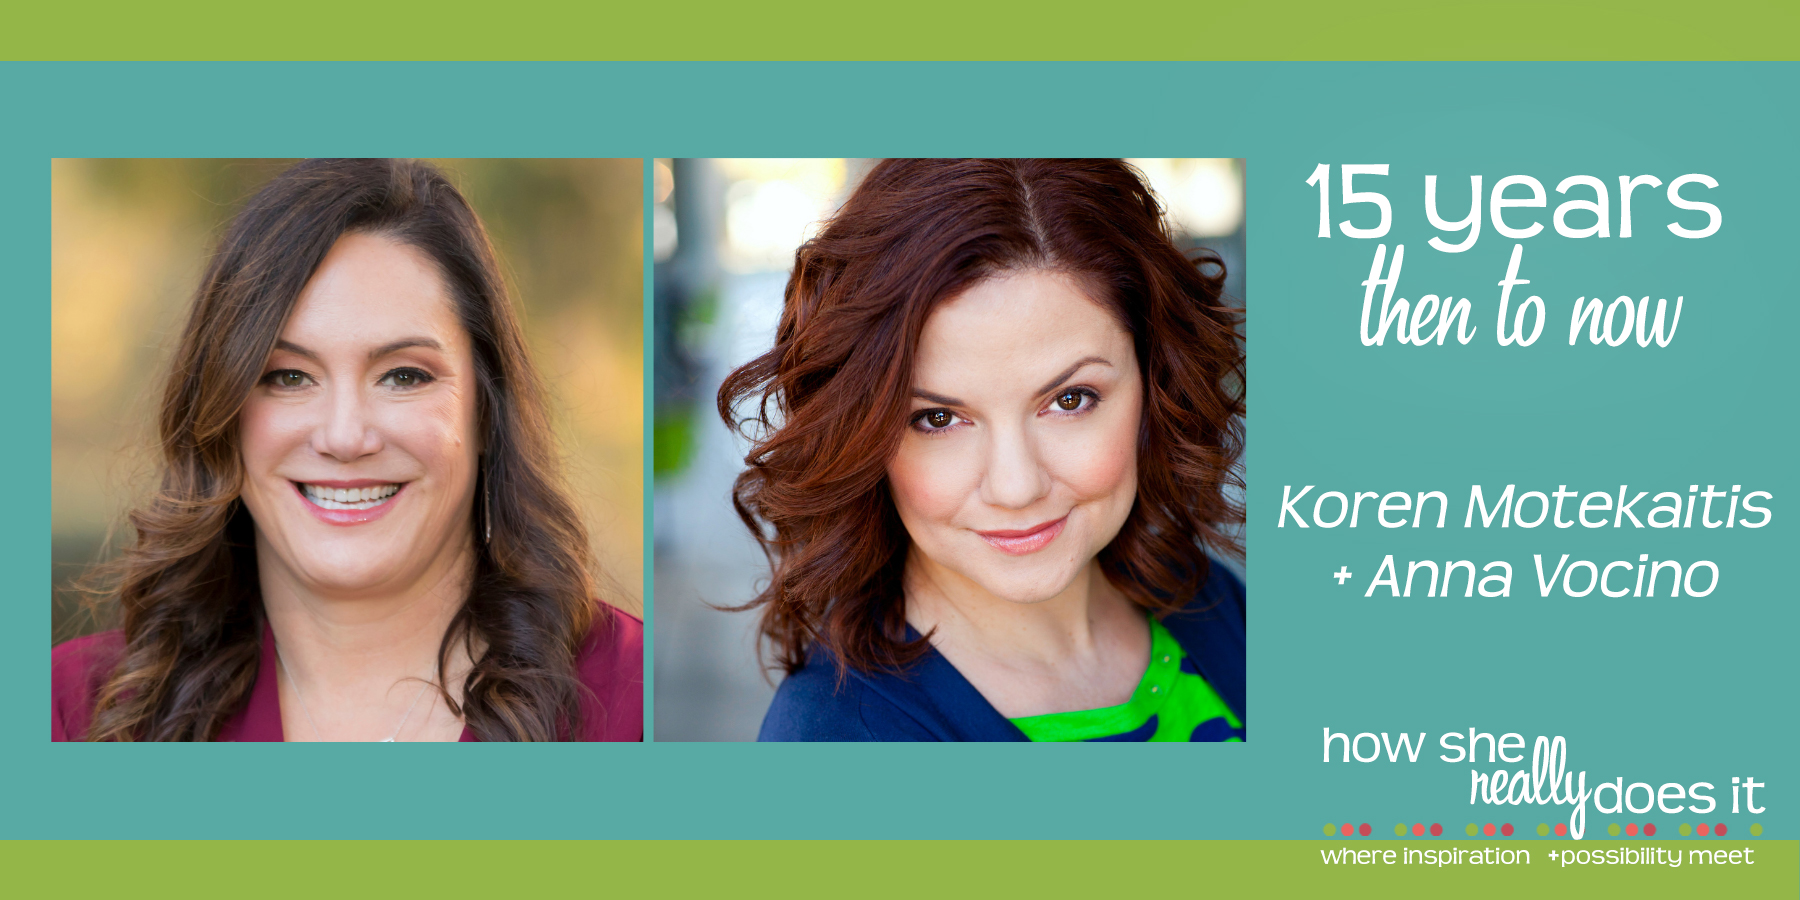 How She Really Does It with Koren Motekaitis | 15 years - then to now with Anna Vocino